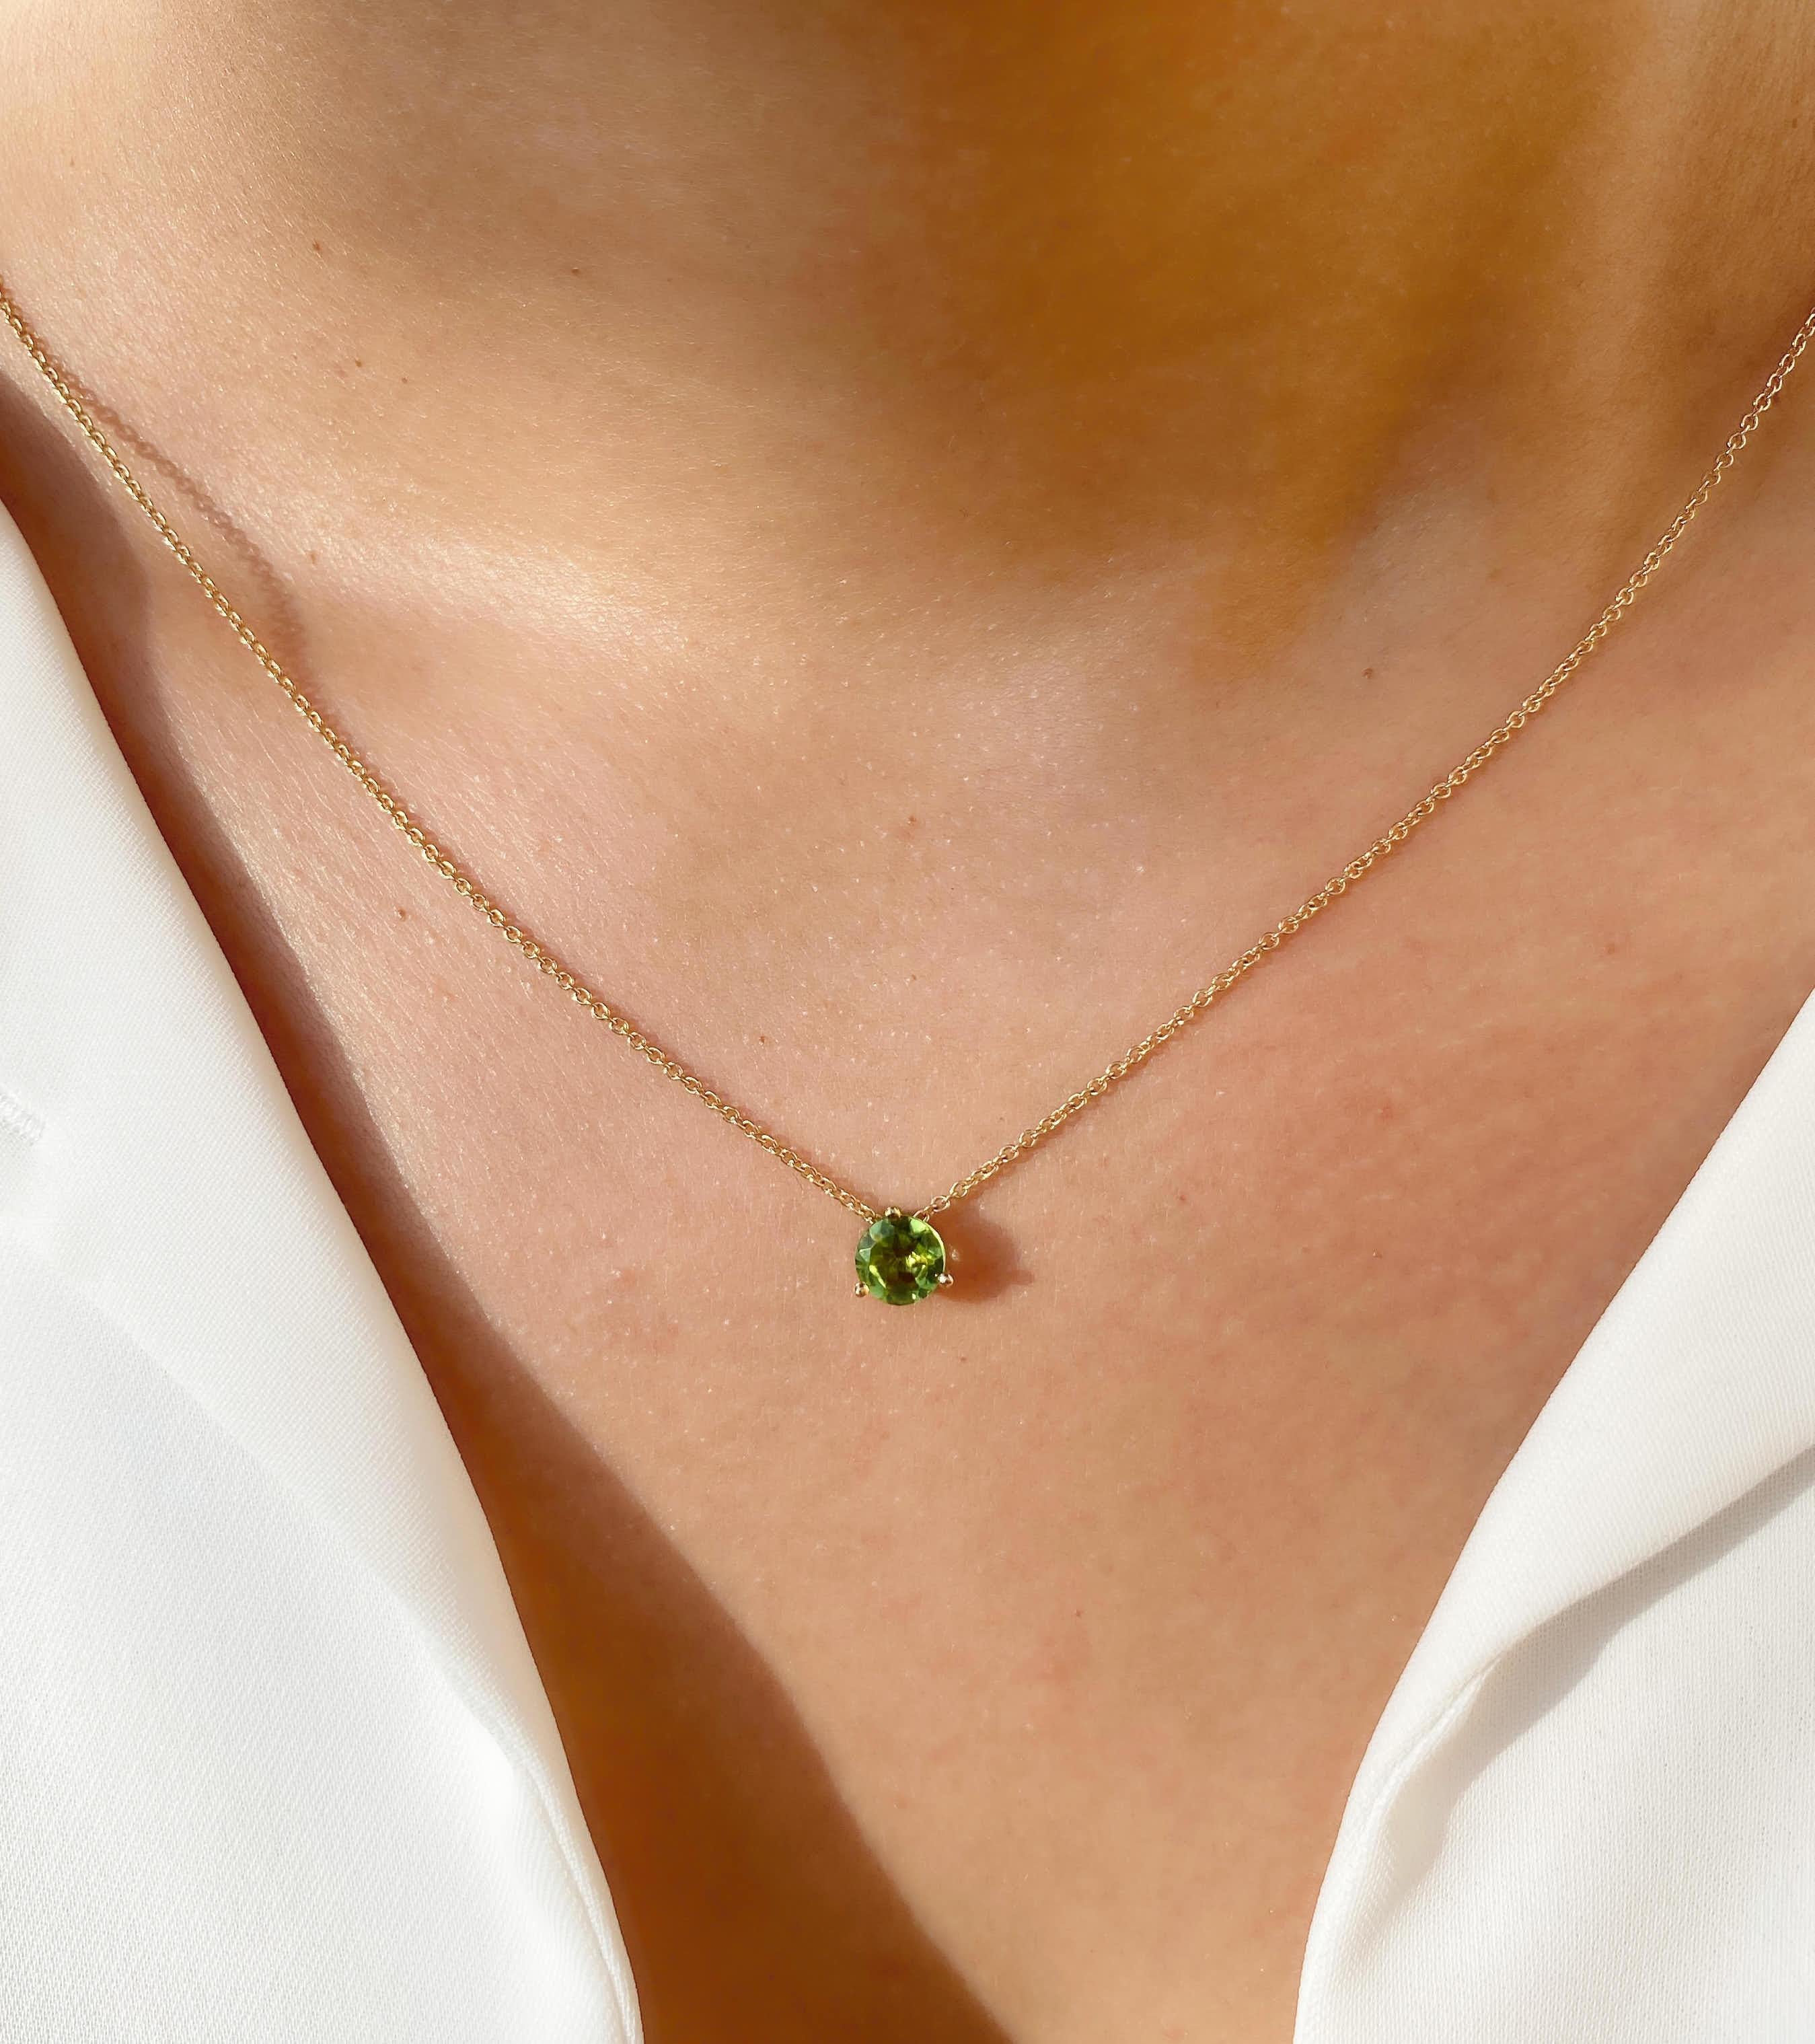 •	18 Karat Recycled Yellow Gold 
•	42 cm chain with extension
•	Available color: Yellow Gold
•	Peridot 6mm round cut
•	Origin: Caparaó mine, Brazil
•	Hand-made in Spain
•	Match with Round Peridot Earrings & Marquise Peridot Necklace

Irene Bozza,